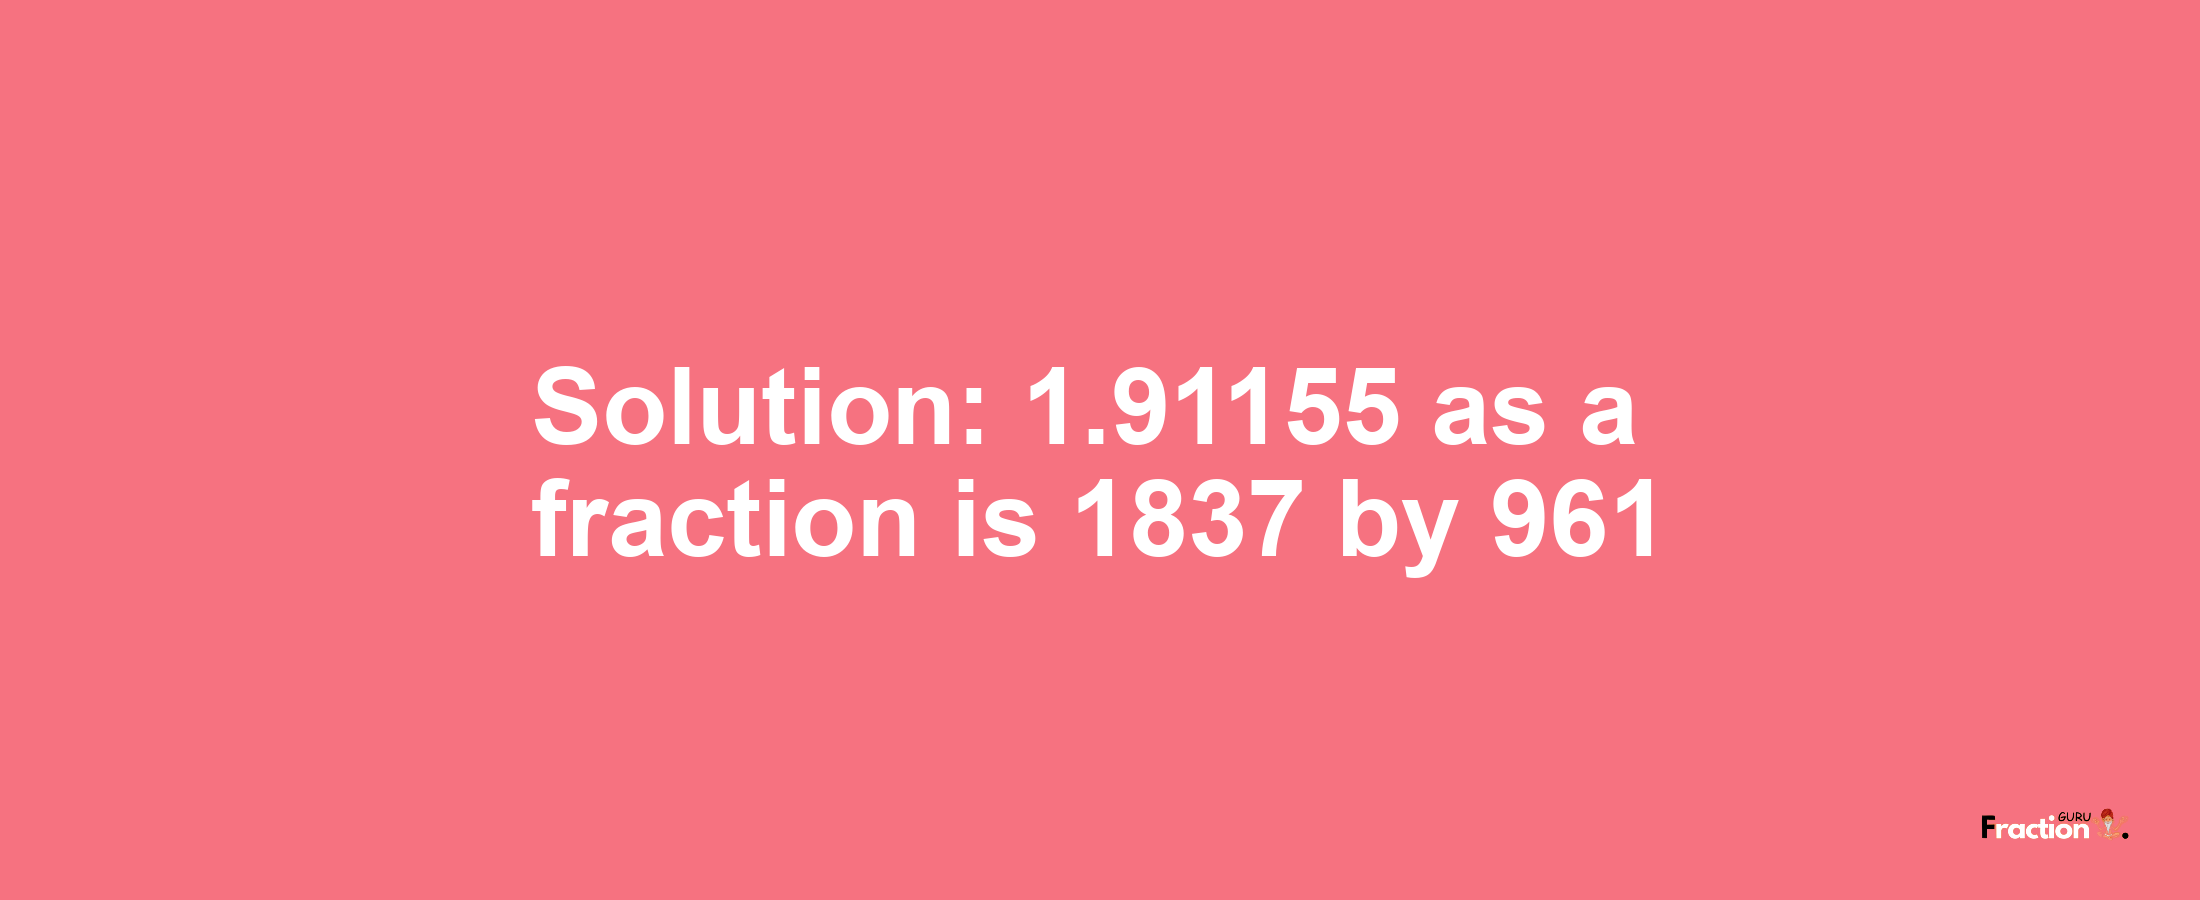 Solution:1.91155 as a fraction is 1837/961